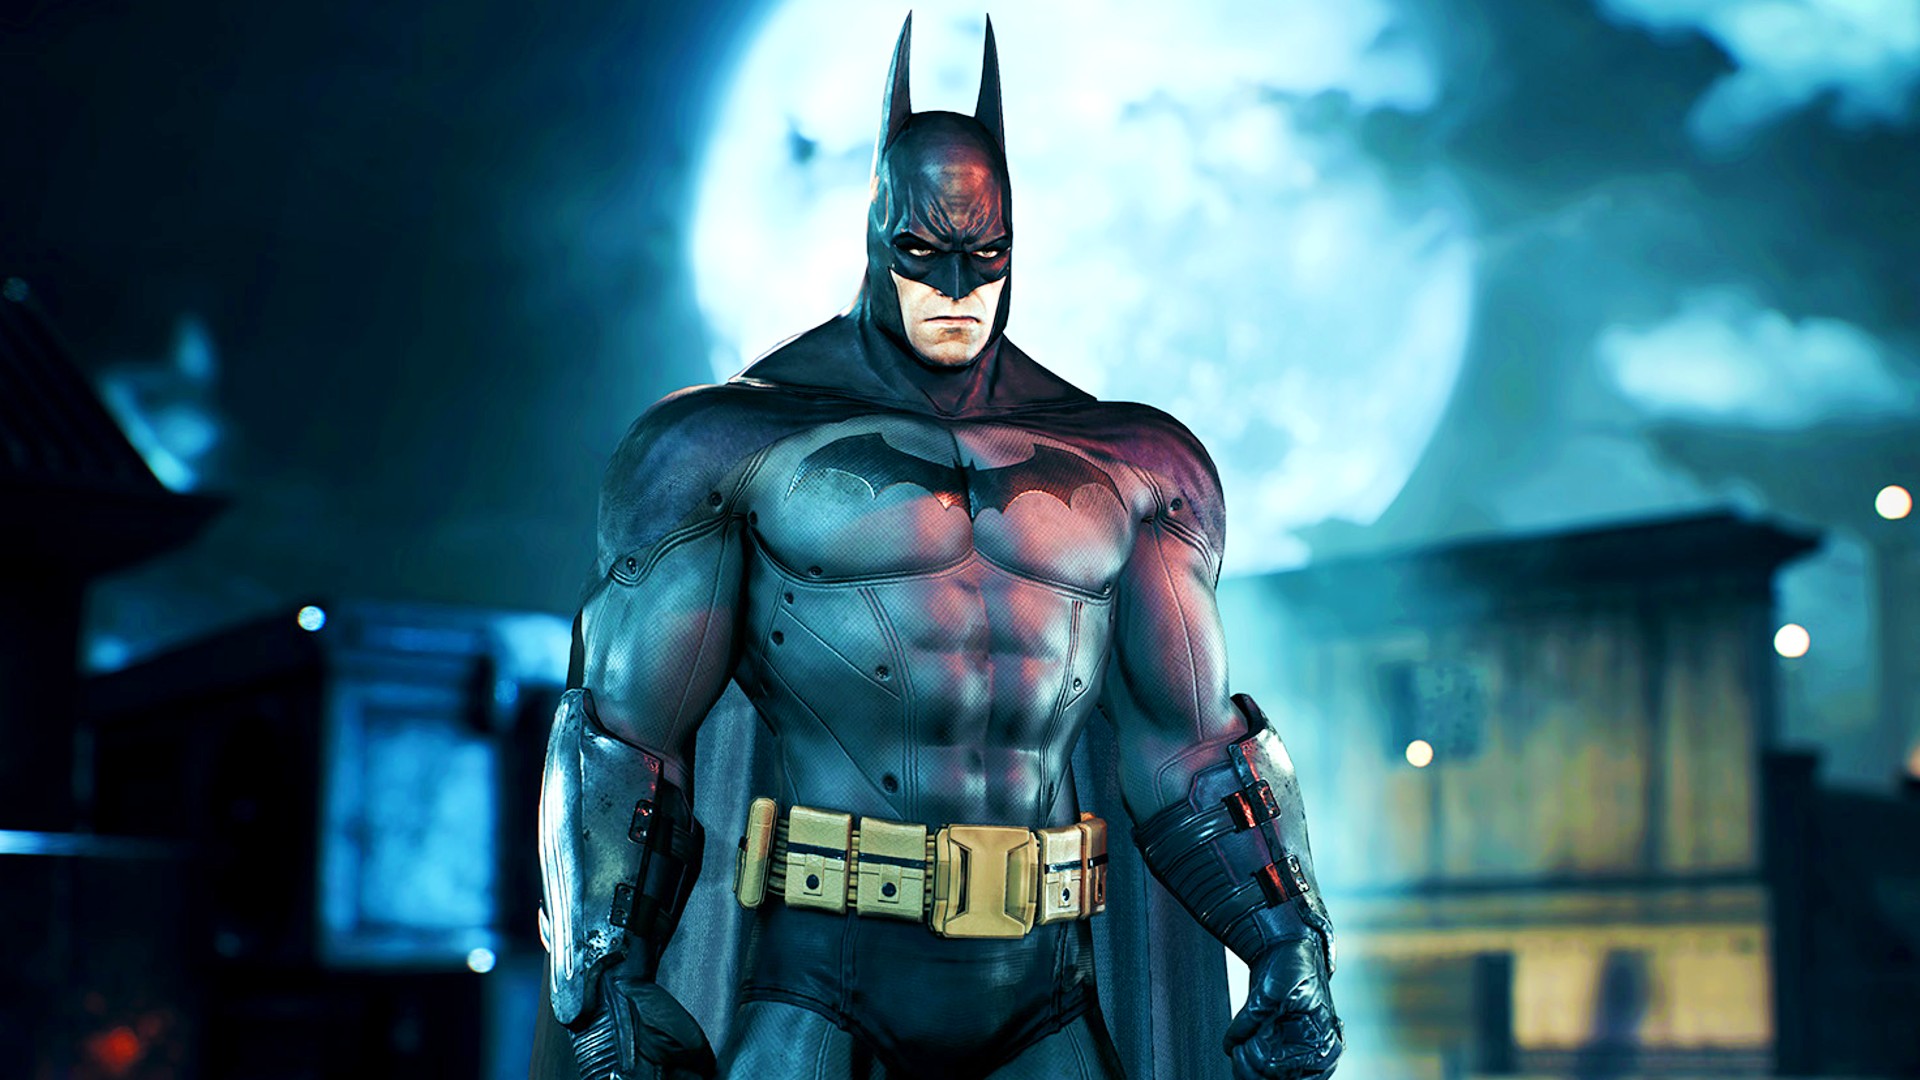 The best Batman games on PC in 2022